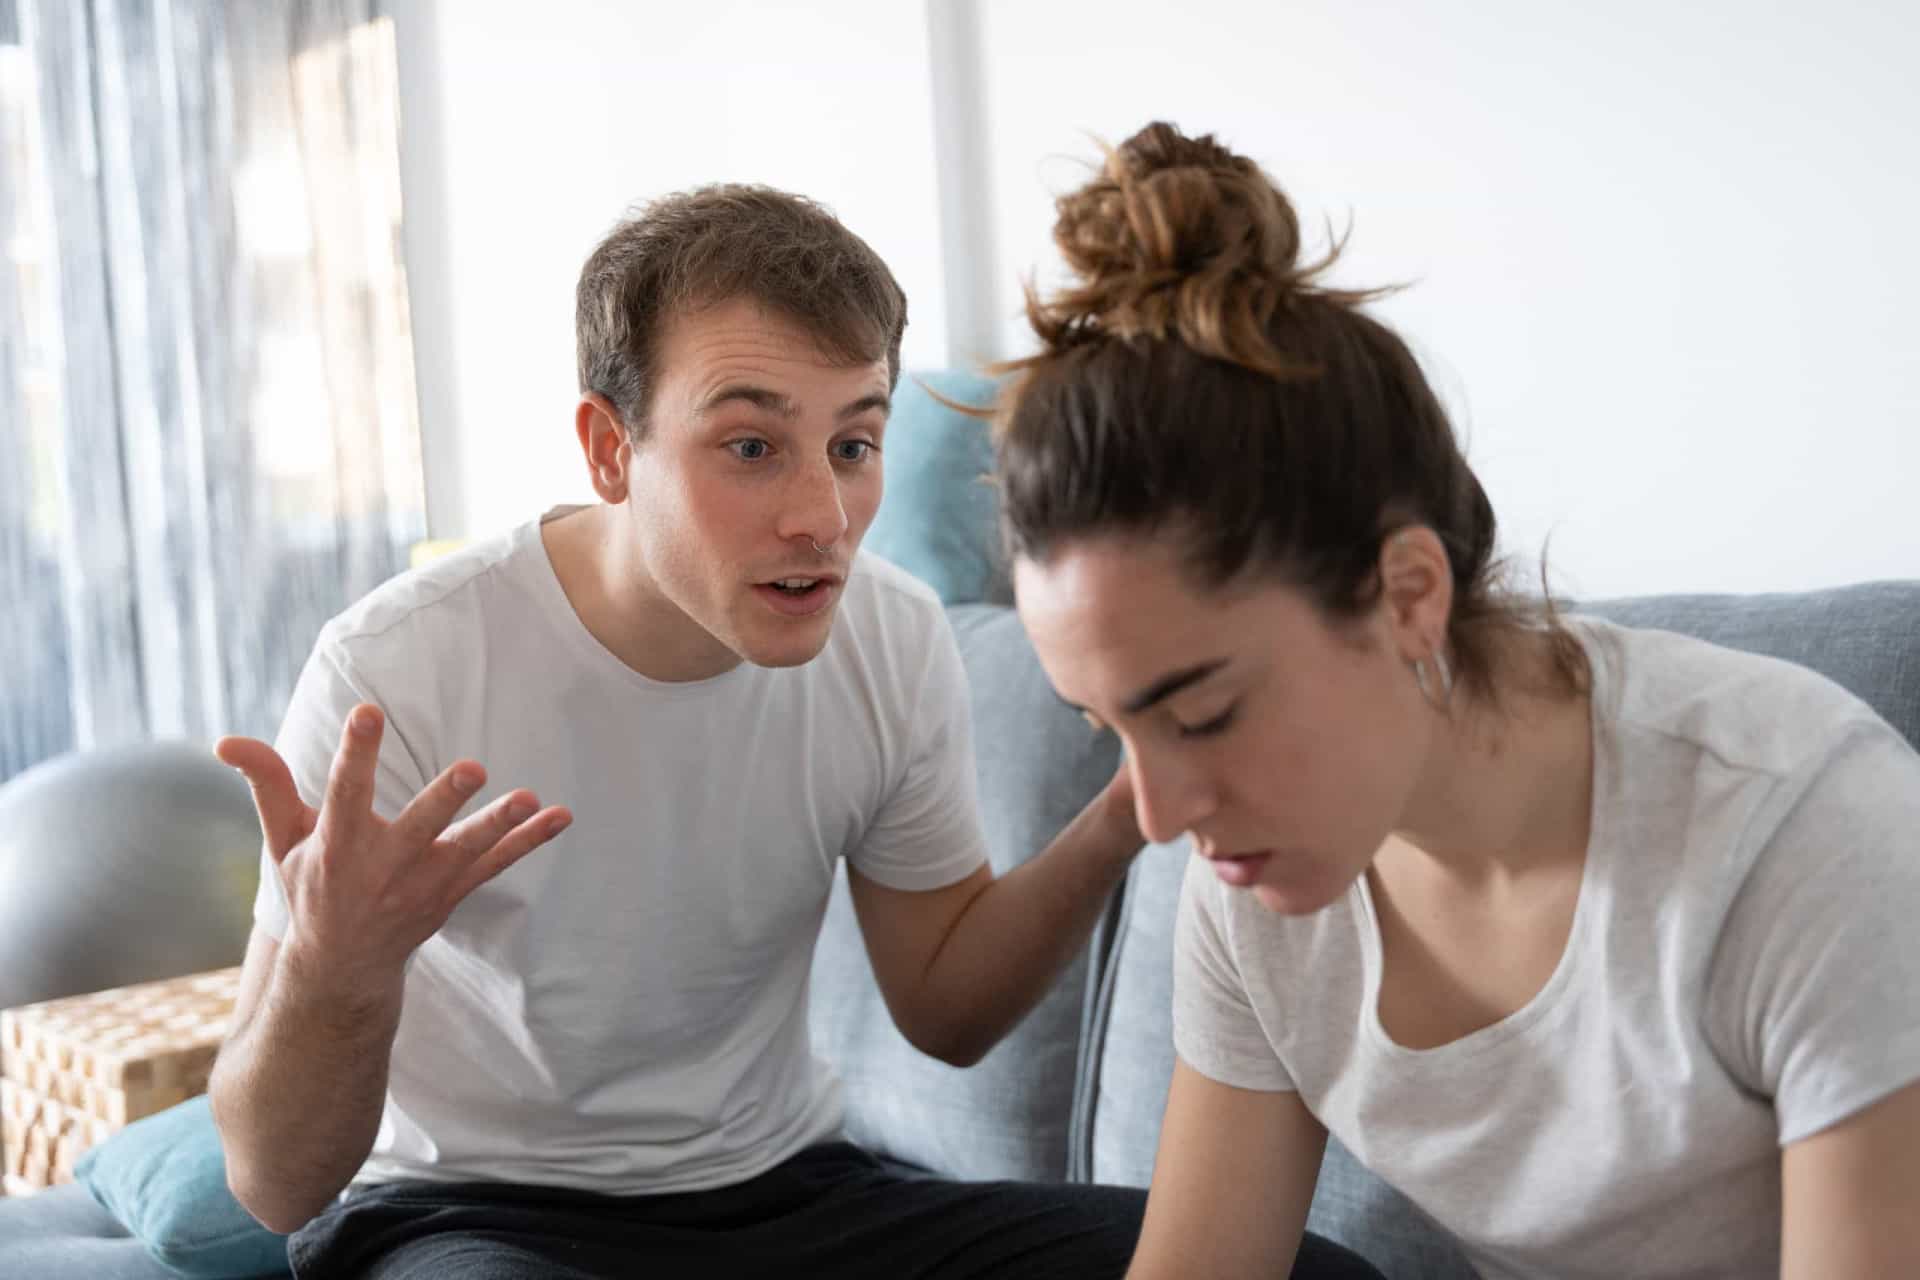 <p>This kind of toxic behavior diminishes the other partner’s freedom, confidence, and sense of self-worth. To deal with it, speak up, set boundaries, and seek couples counseling. </p><p><a href="https://www.msn.com/en-us/community/channel/vid-7xx8mnucu55yw63we9va2gwr7uihbxwc68fxqp25x6tg4ftibpra?cvid=94631541bc0f4f89bfd59158d696ad7e">Follow us and access great exclusive content everyday</a></p>